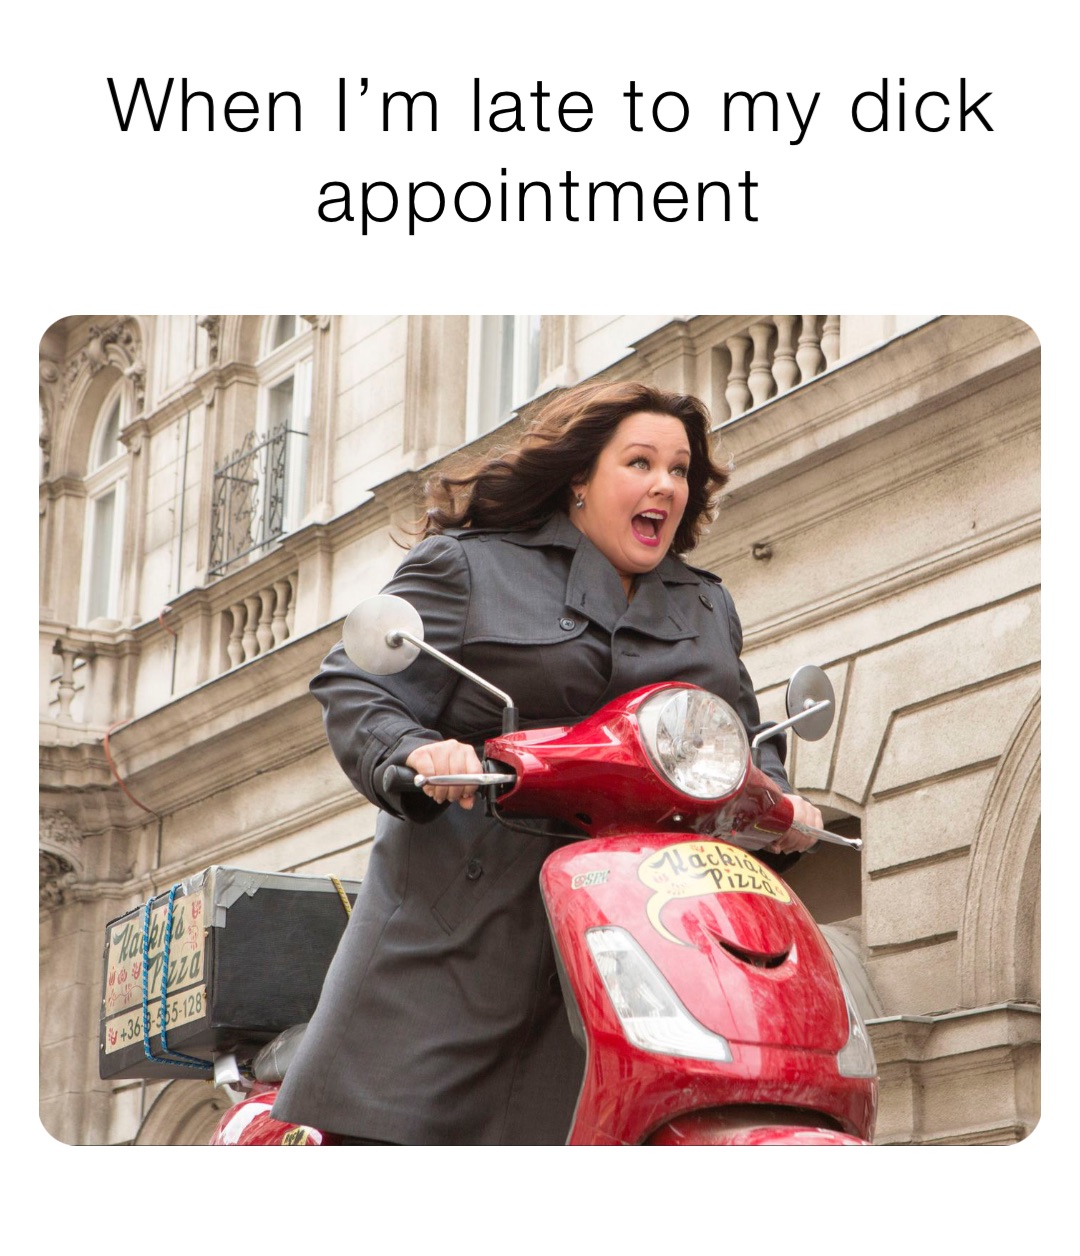 When I’m late to my dick appointment